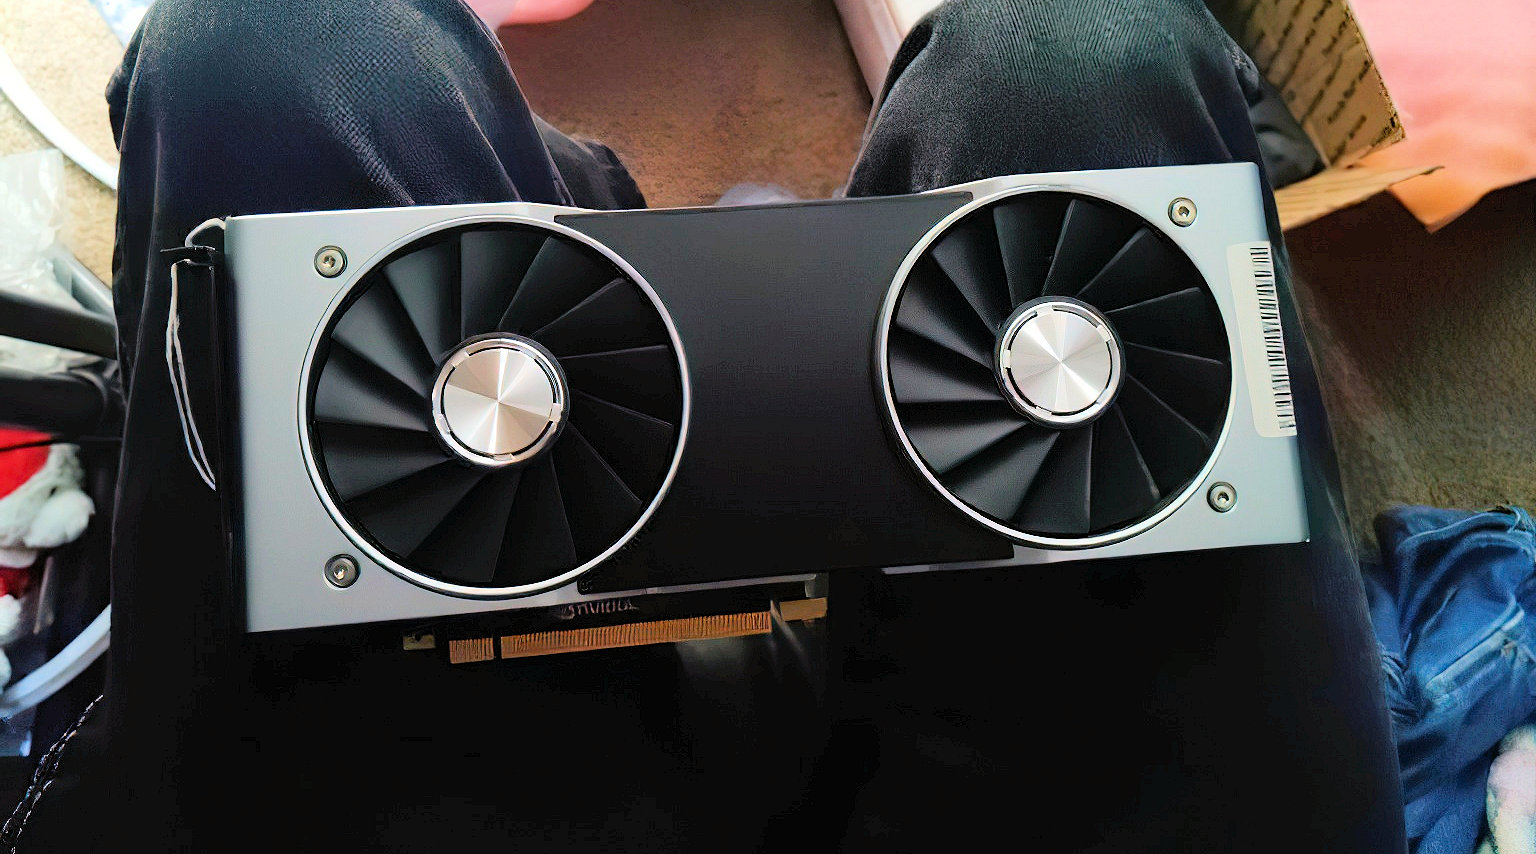 Nvidia’s GeForce GTX 2080 Prototype Shows Up In The Wild